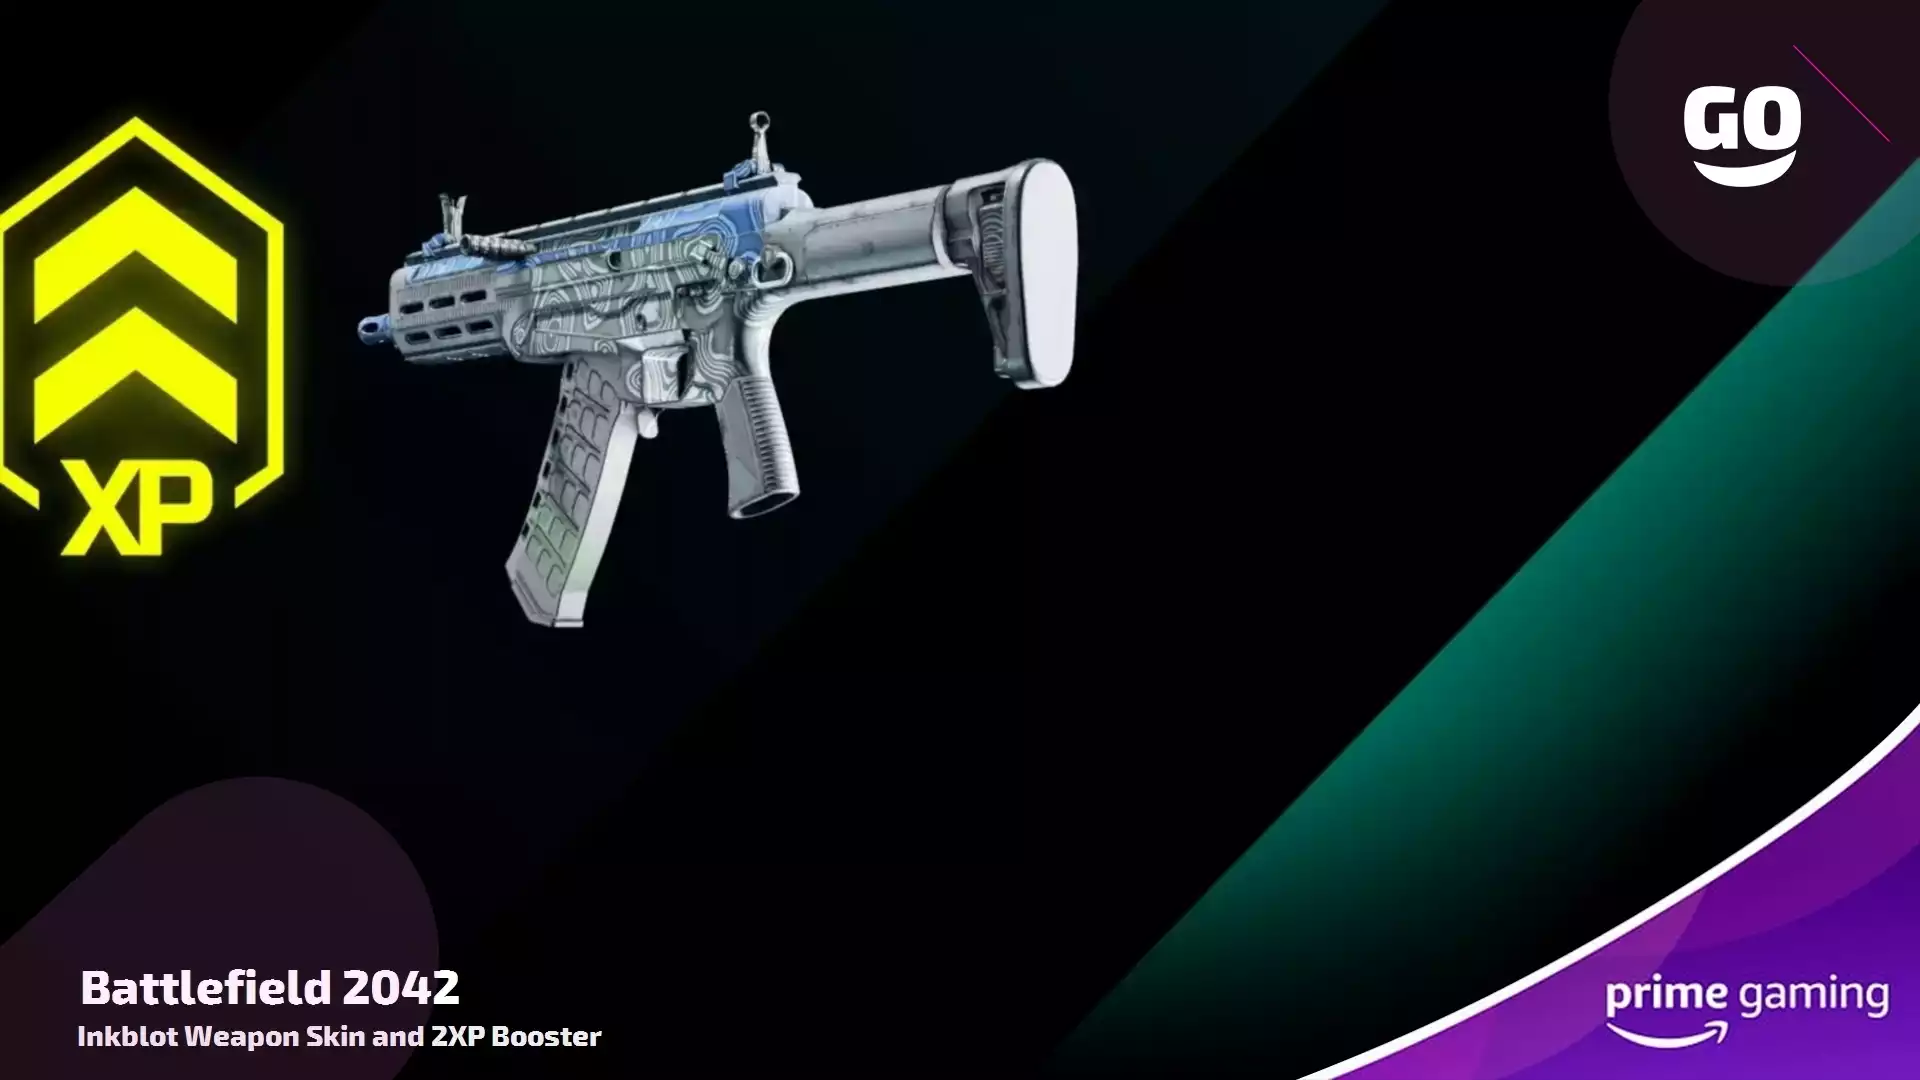 Inkblot Weapon Skin and 2XP Booster